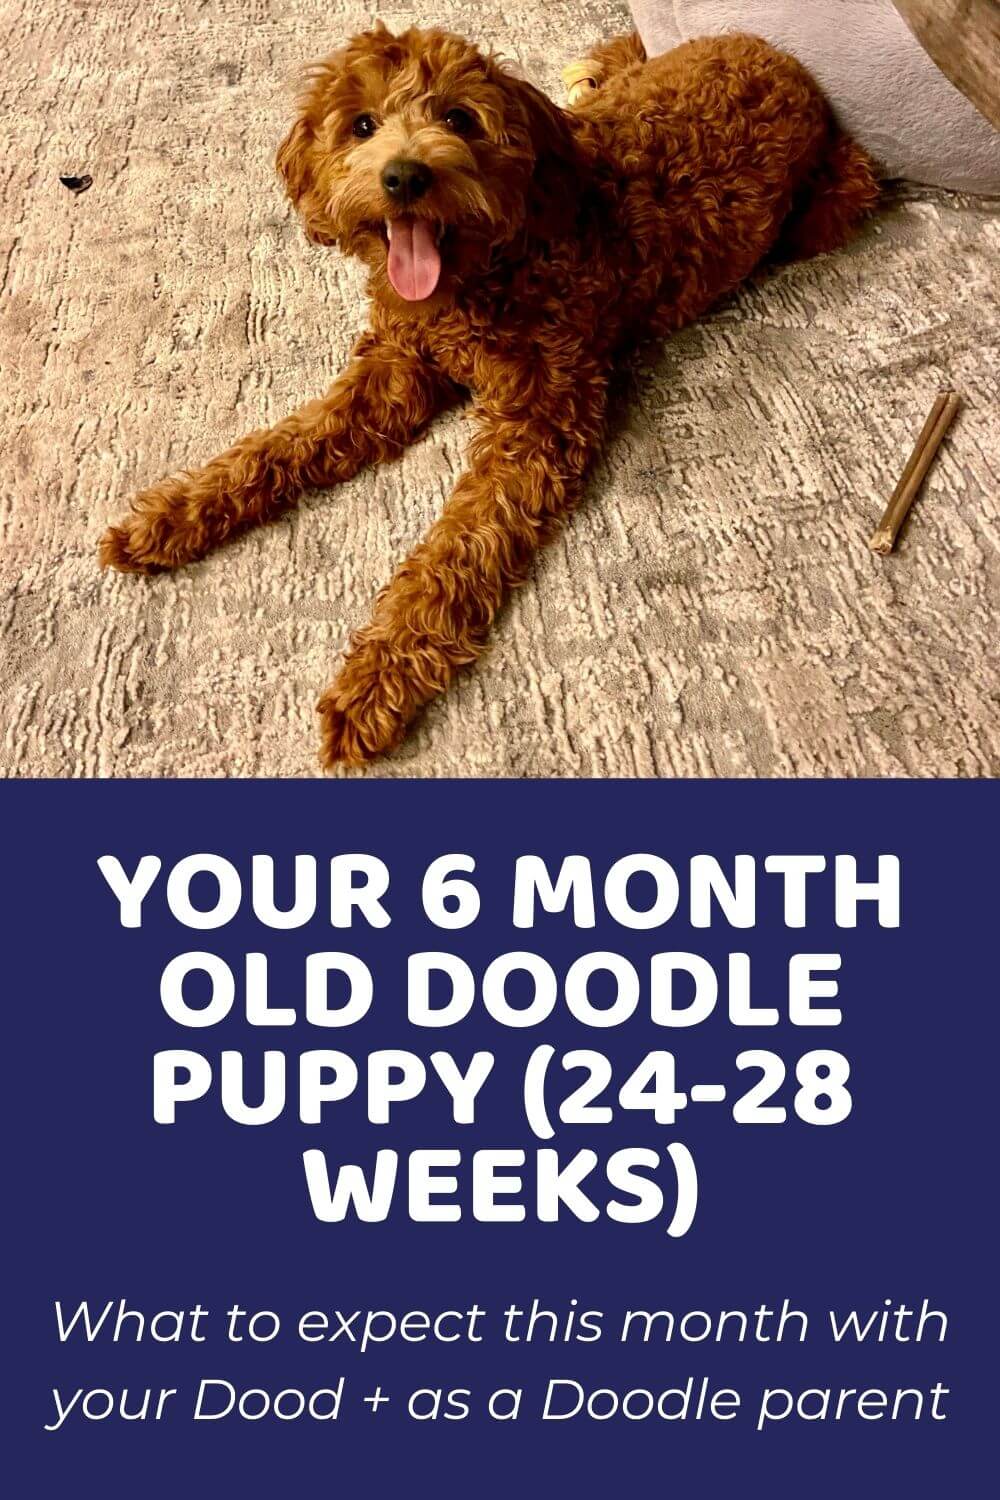 Your 6 Month Old Doodle Puppy (24-28 weeks)